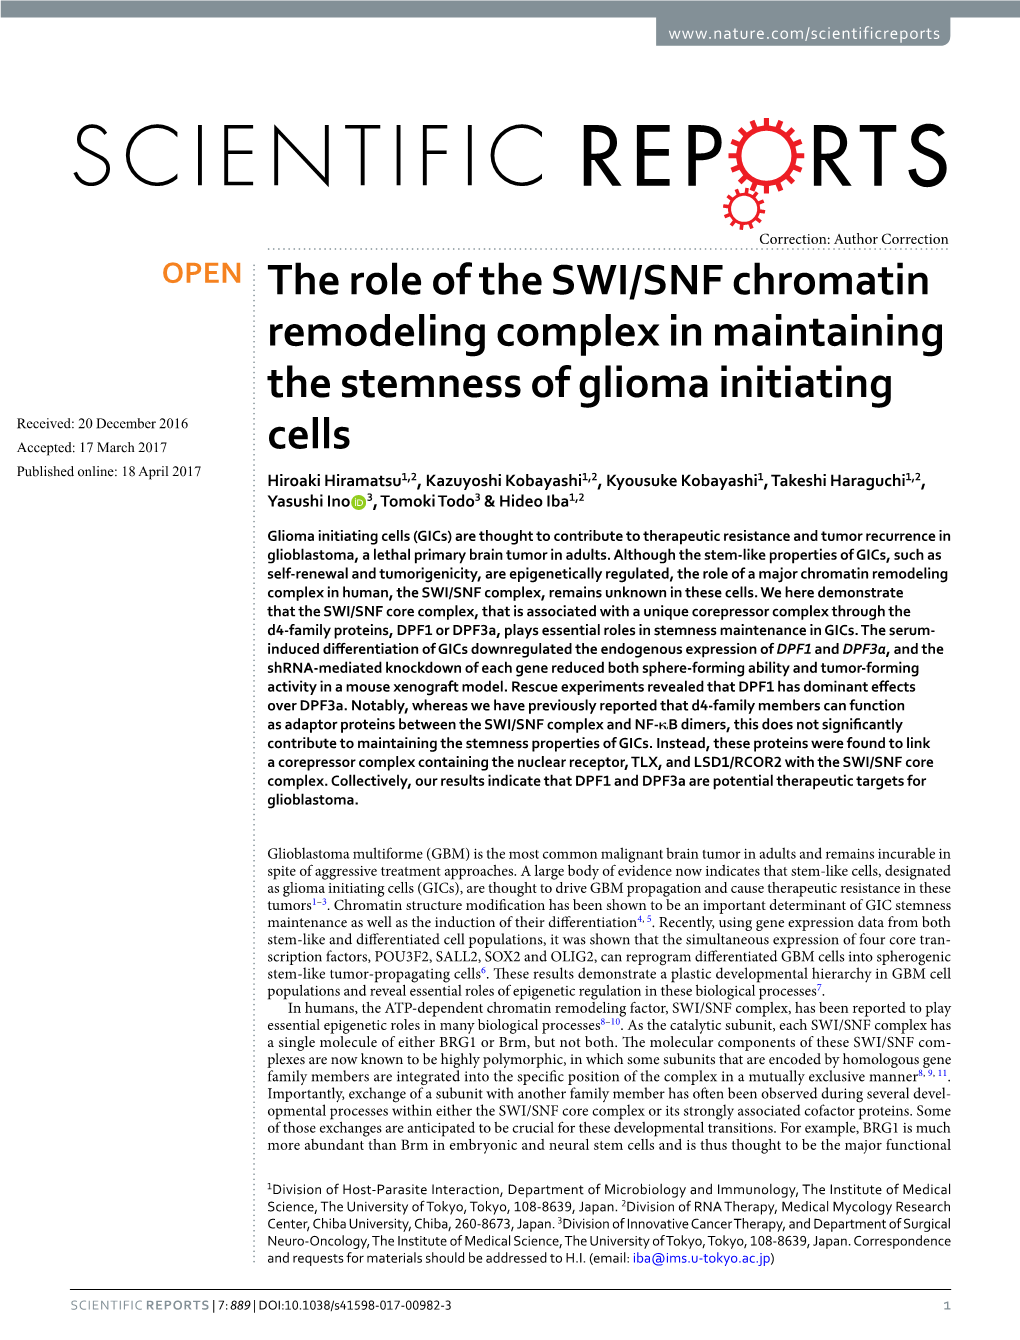 The Role of the SWI/SNF Chromatin Remodeling Complex in Maintaining